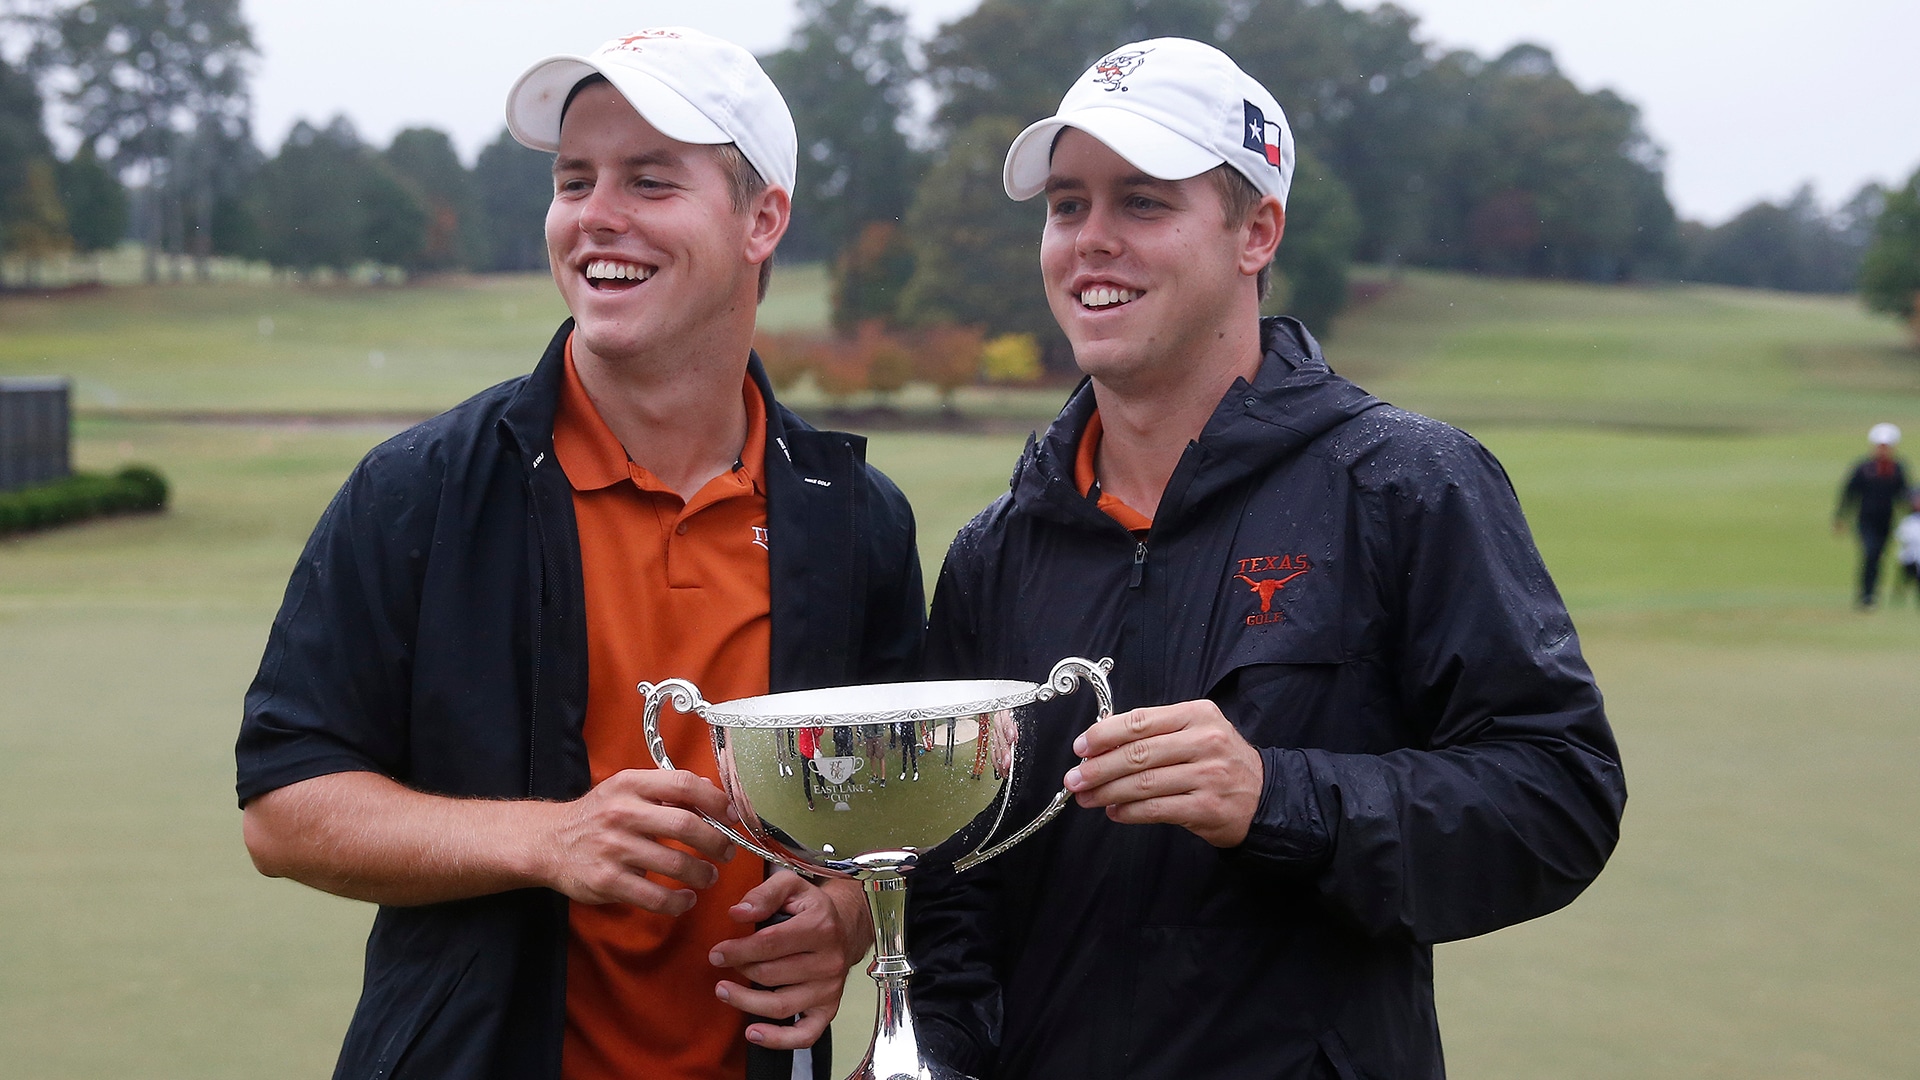 Parker Coody Monday qualifies for Honda Classic, joining twin brother in field